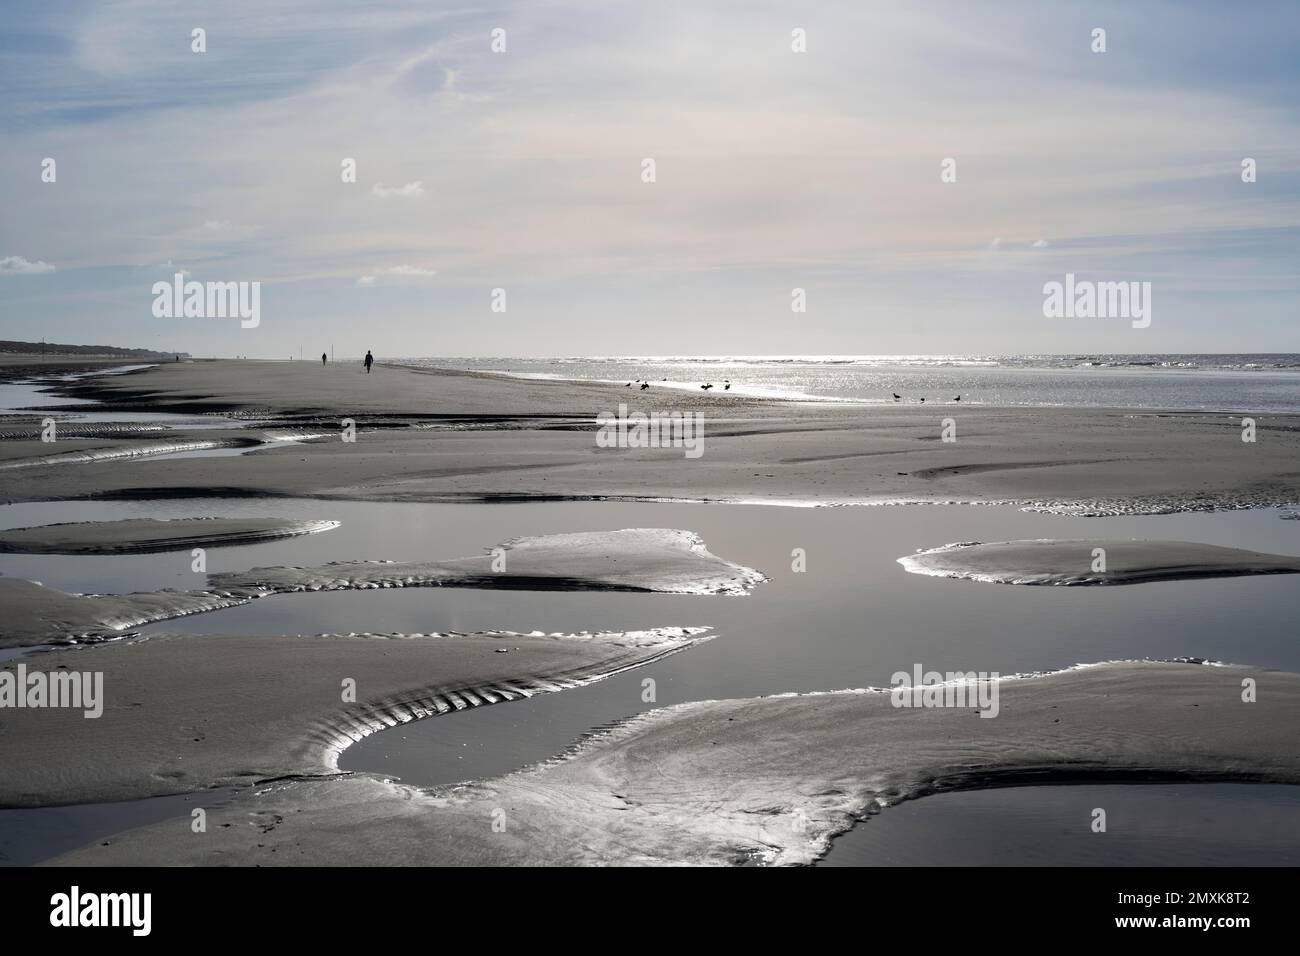 Walkers on the beach at low tide with tide pools, Juist Island, Lower Saxony Wadden Sea, North Sea, East Frisia, Lower Saxony, Germany, Europe Stock Photo